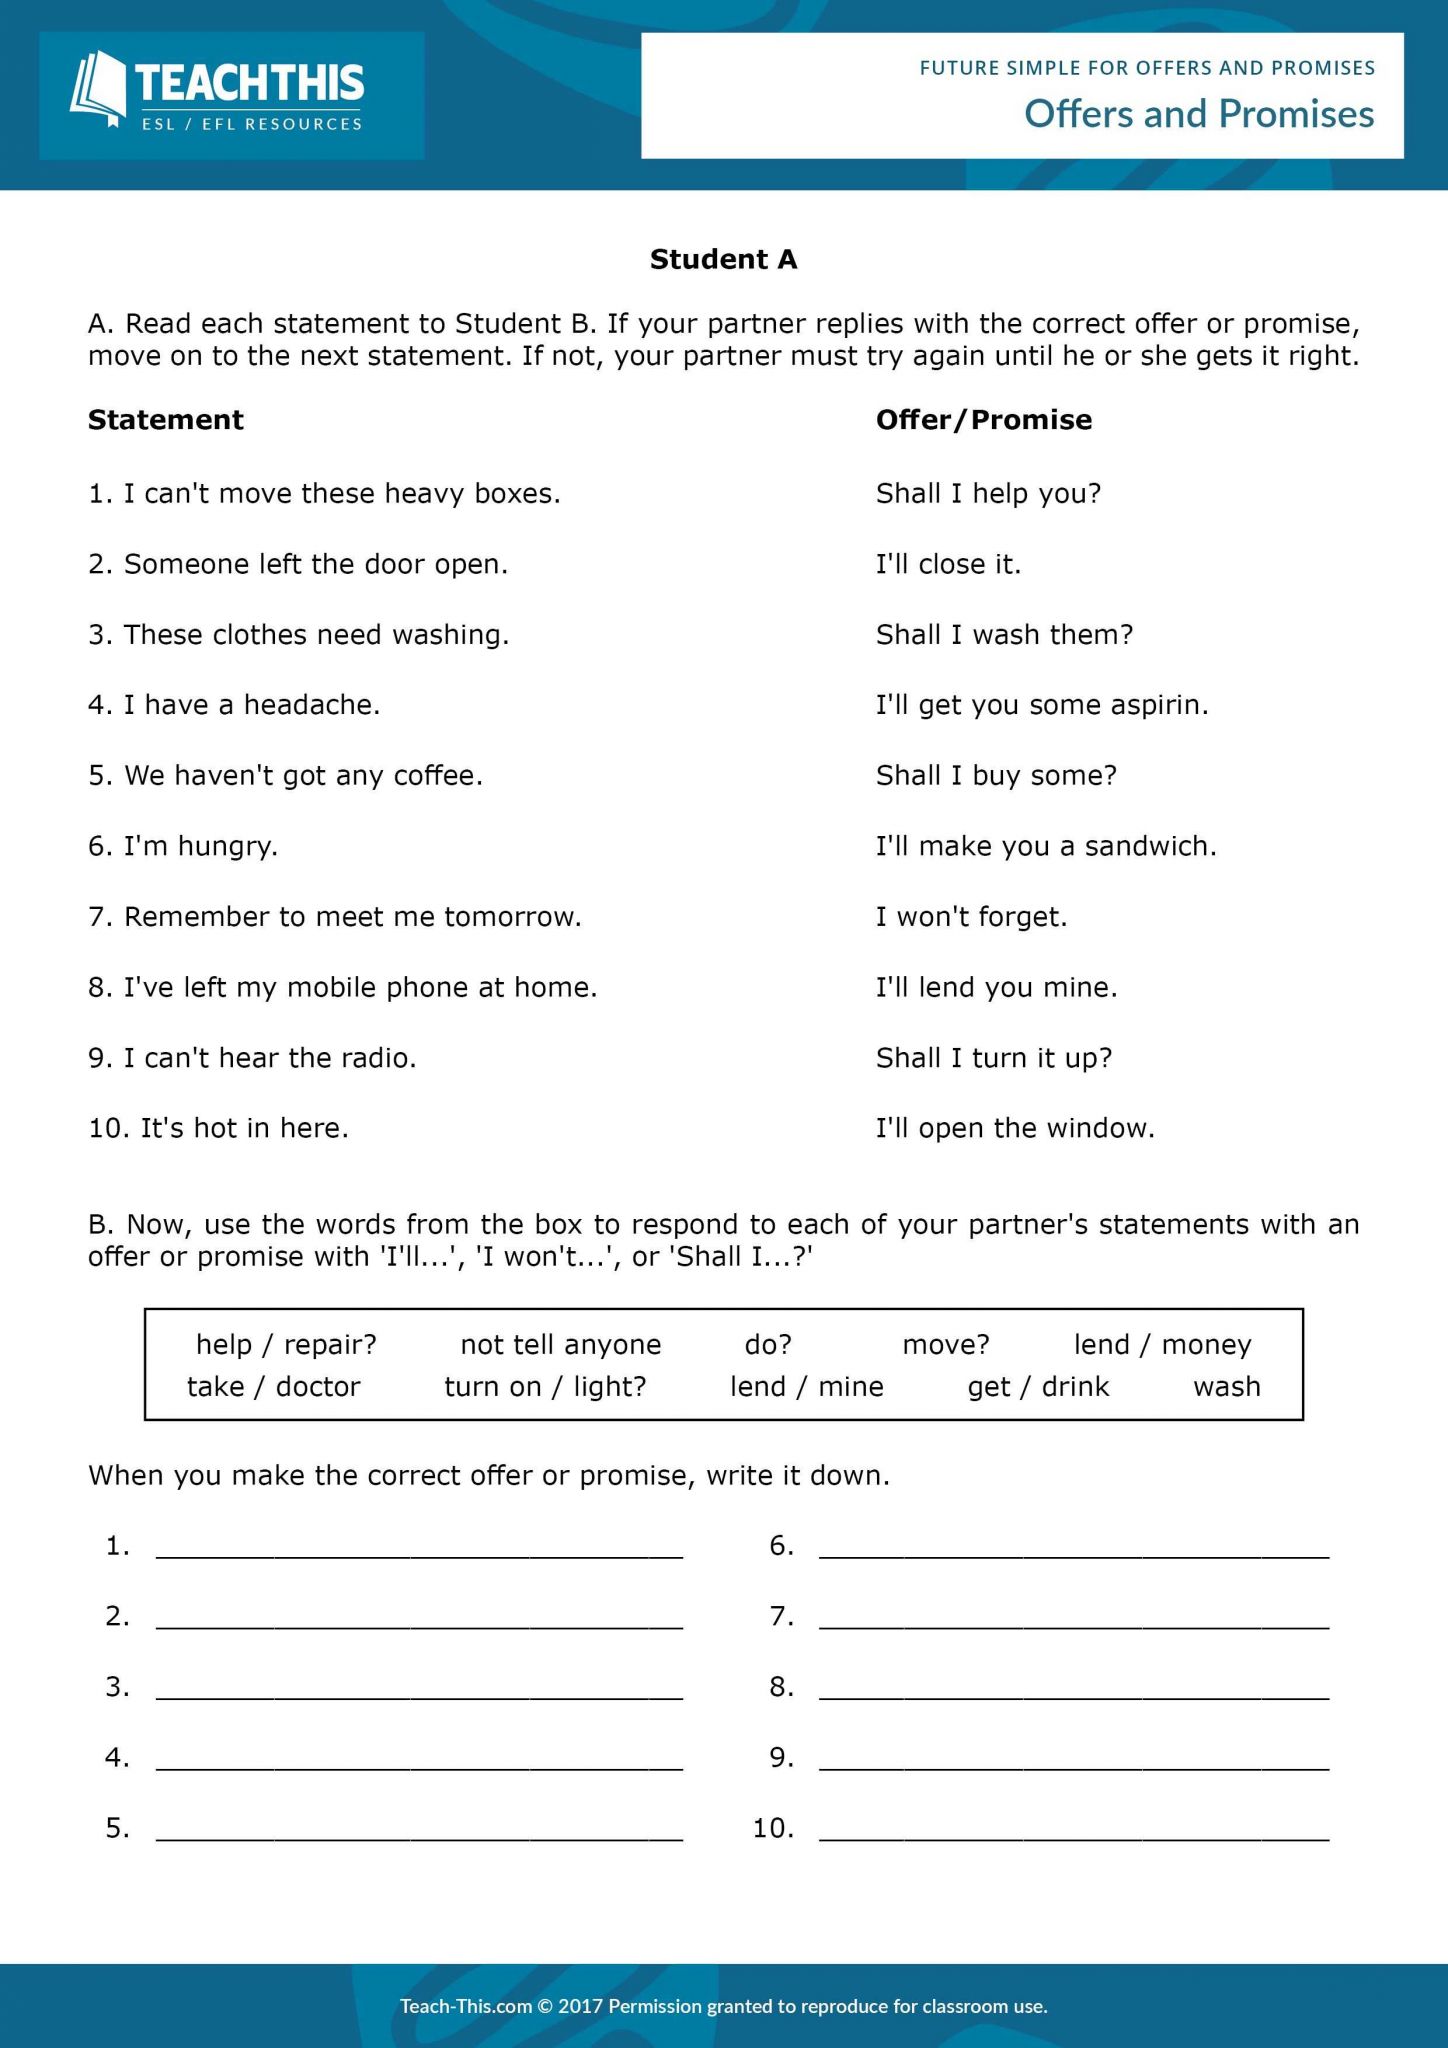 Spanish to English Worksheets Along with Future Simple Fers Promises Decisions Pinterest